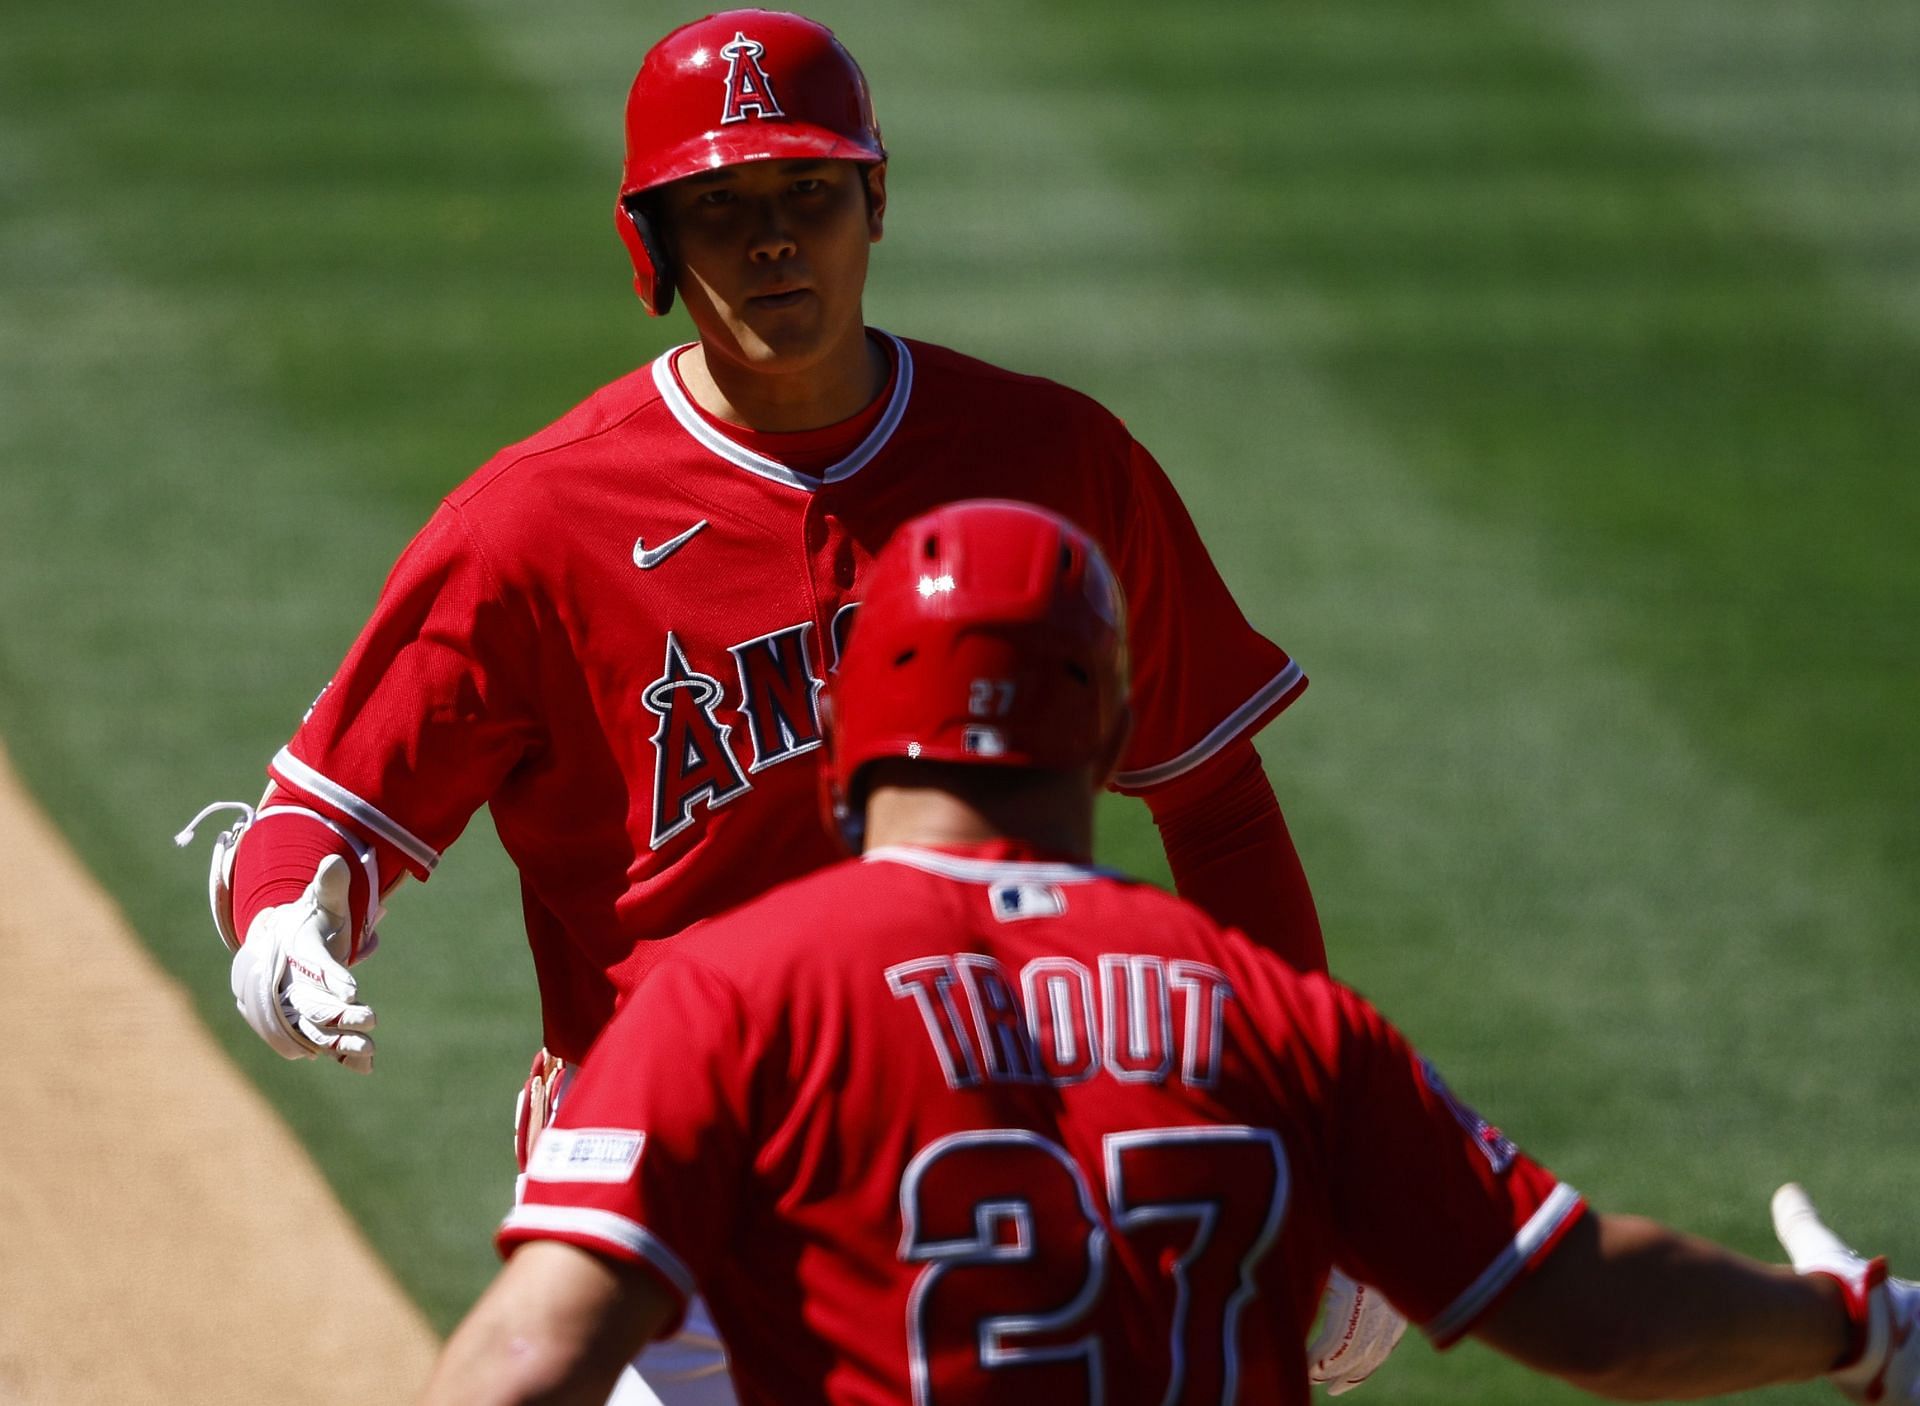 Mike Trout and Shohei Ohtani could be worth $1 billion combined next year